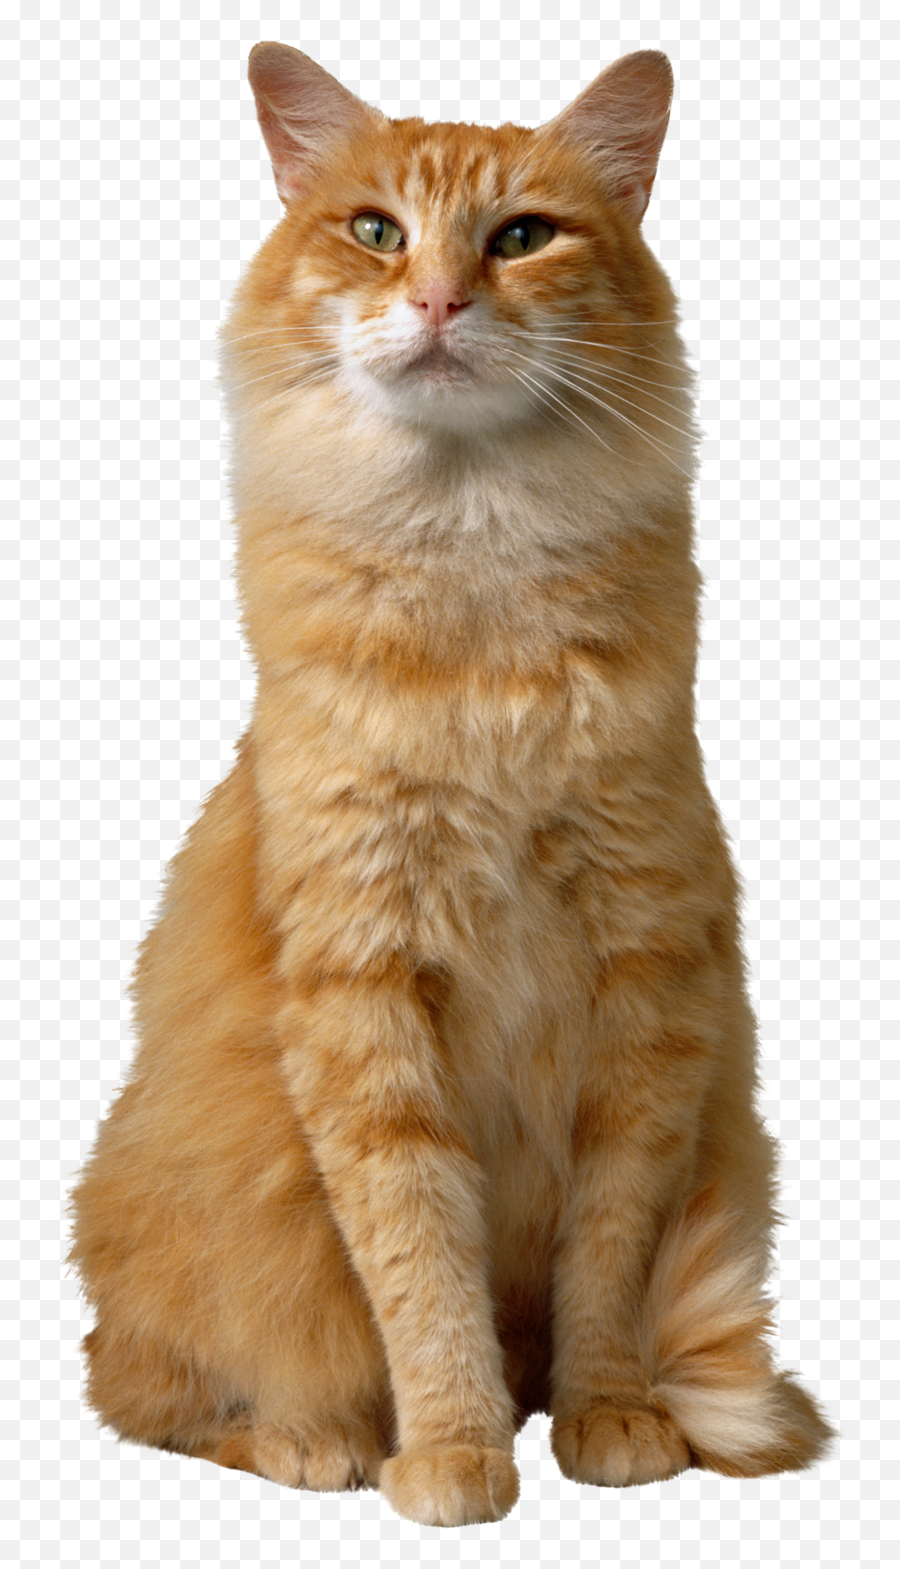 Cat Png Transparent Image For Free Download 44 - Photo 4362 Orange Tabby Cat Png,Cats Transparent